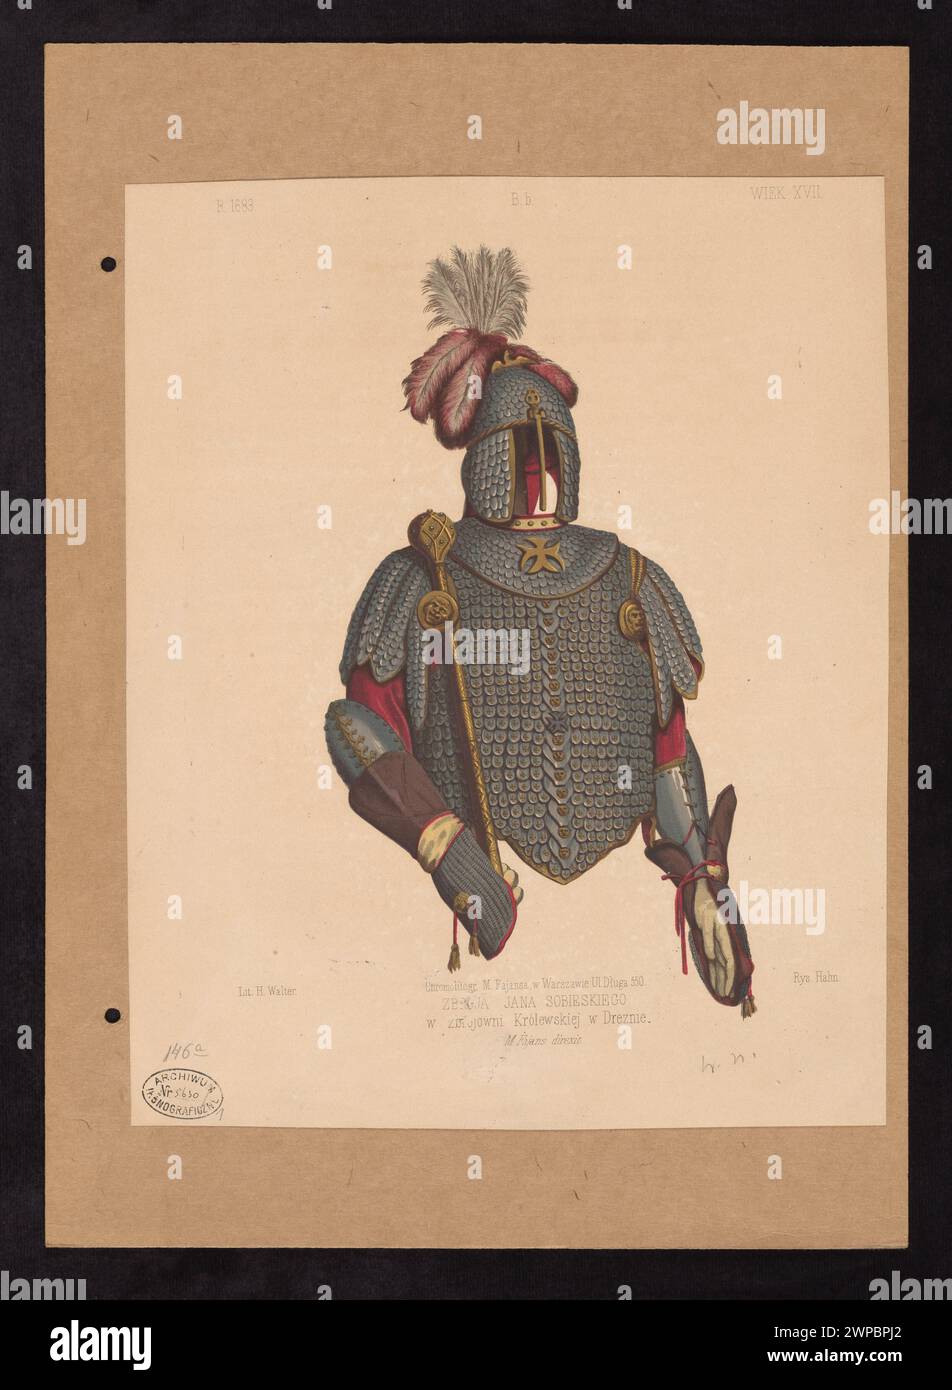 Jan Sobieski's armor in the Royal Armory in Dre Nie, il. Z: Aleksander Przedziecki, Edward Rastawiecki, 'Patterns of the Medaline Art and from the Renaissance era after the end of the 17th century in former Poland' (Warsaw, 1855-1858), Series 2, tab. S; Hahn, Walter, H., Fajans, Maksymilian (Warsaw; Litographic and photographic desk; 1853-1892), Fajans, Maksymilian (1825-1890), Przedziecki, Aleksander (1814-1871), Rastawiecki, Edward (1804-1874 ), Unger, Józef (Warsaw; printing house, publishing house, book; 1841-va 1877); 1855-1858 (1855-00-00-1858-00-00); Stock Photo